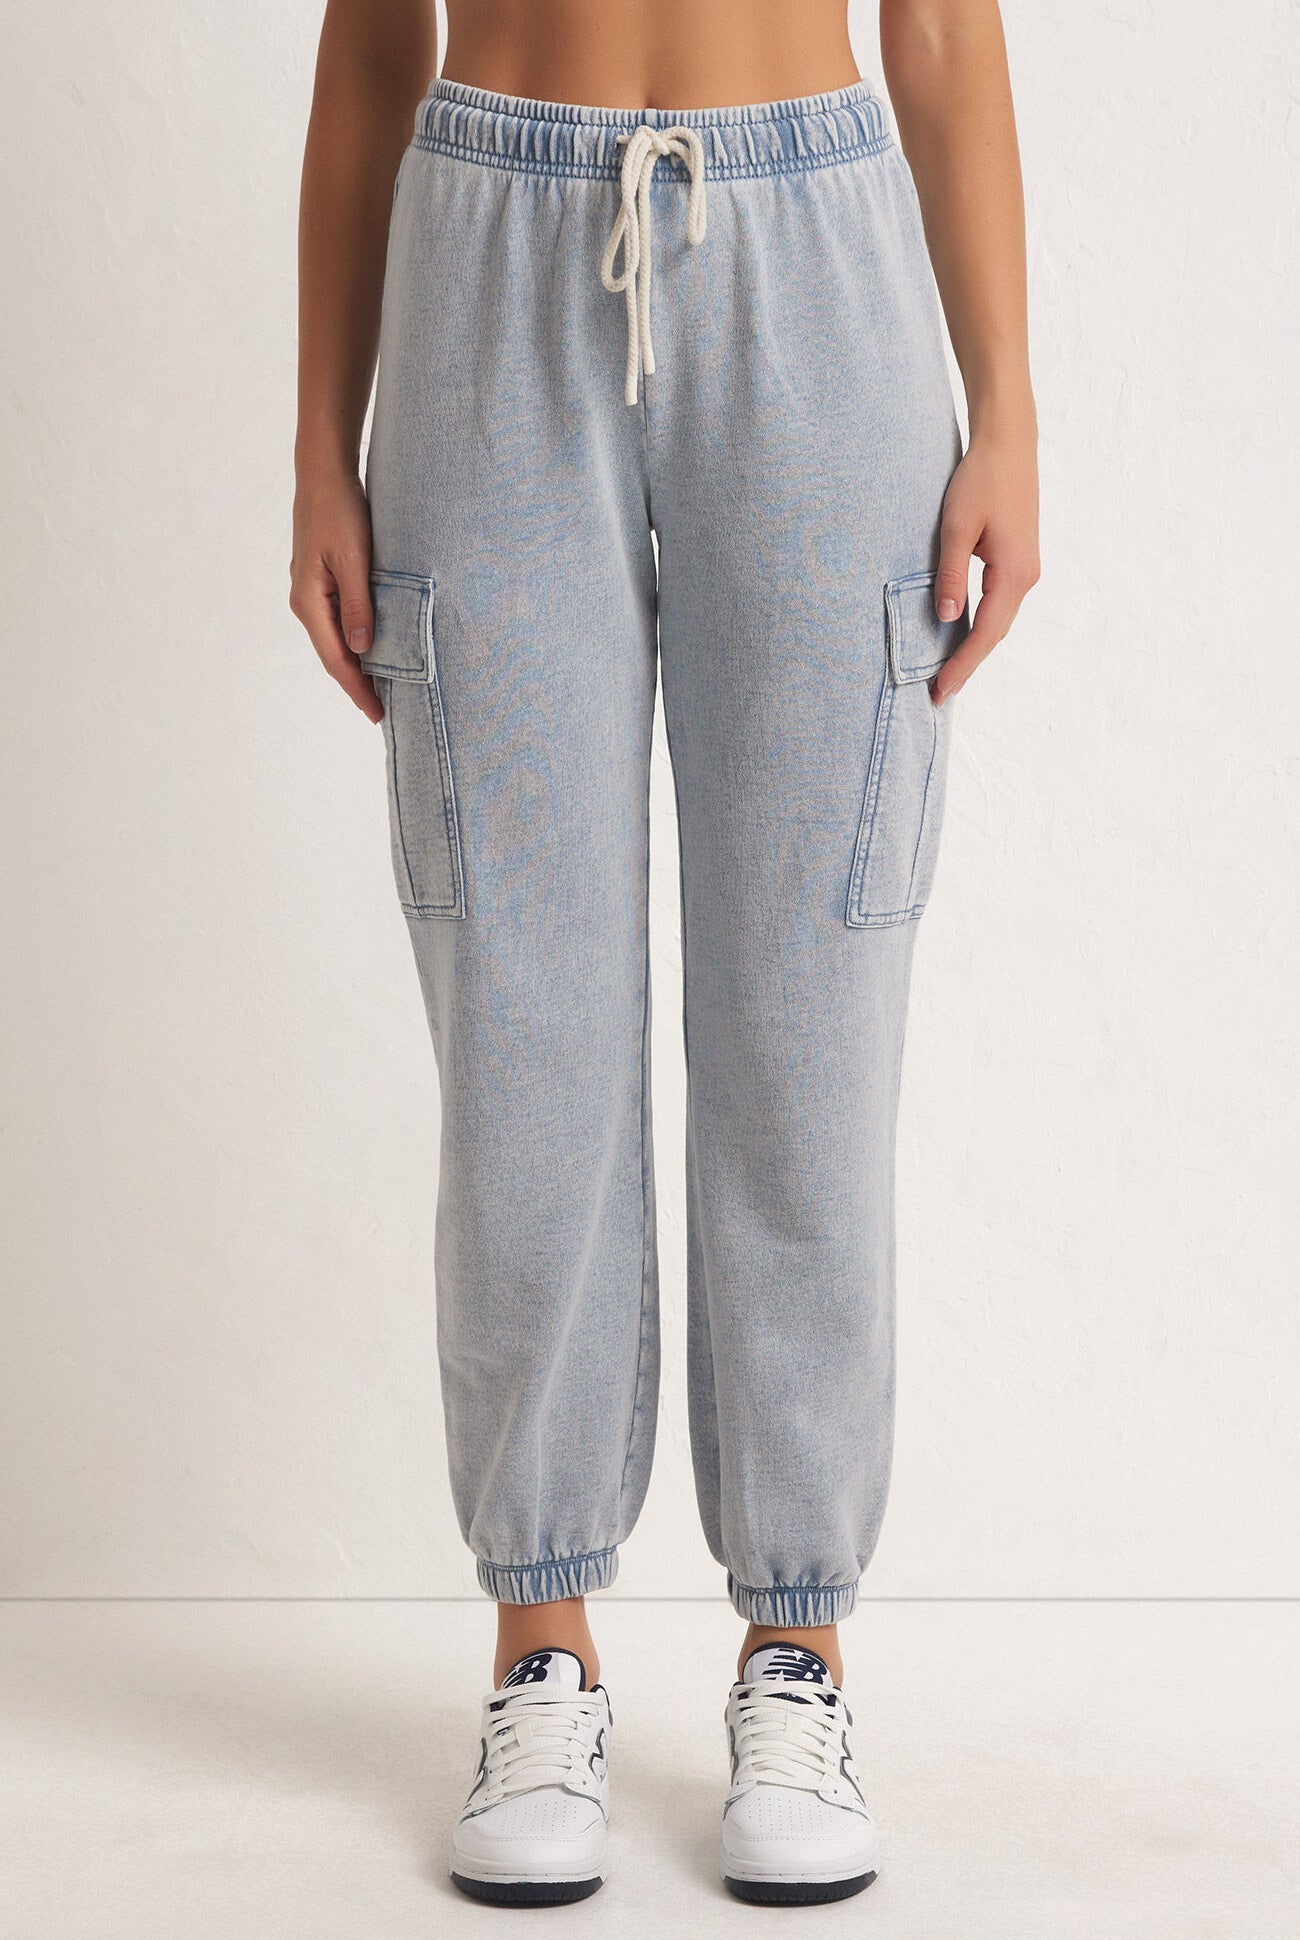 Tempo Knit Denim Jogger-Loungewear Bottoms-Vixen Collection, Day Spa and Women's Boutique Located in Seattle, Washington